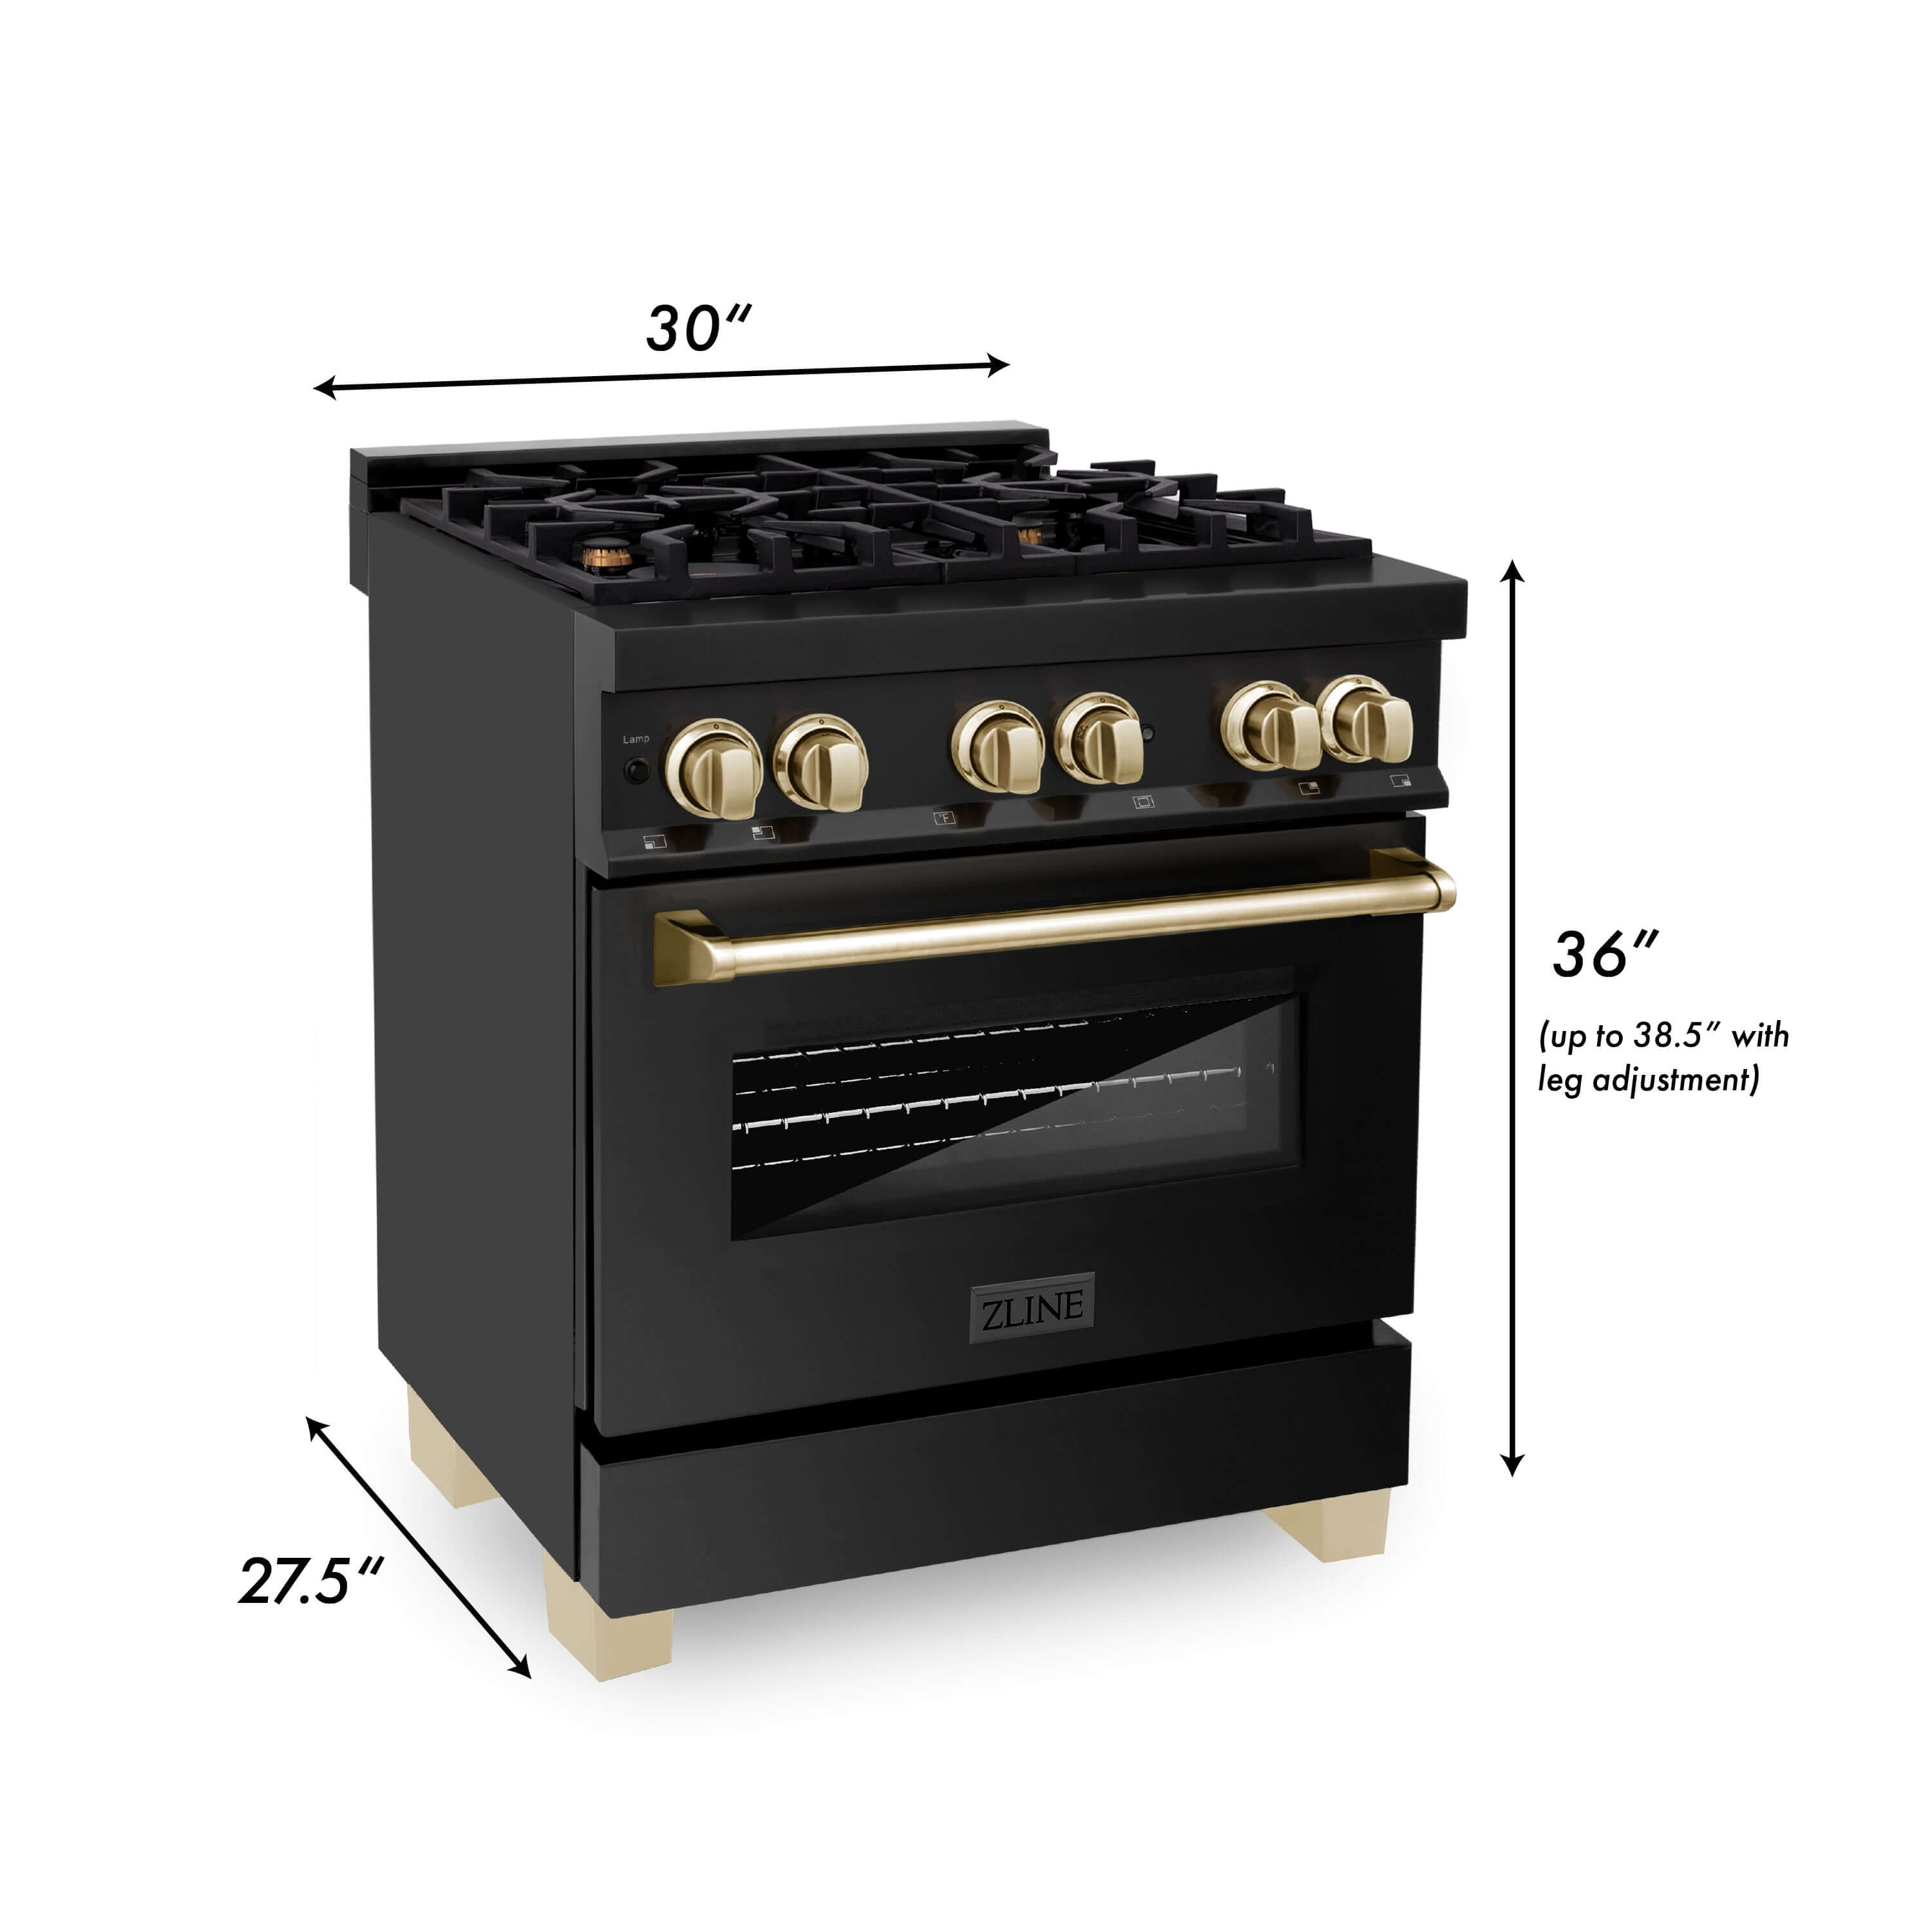 ZLINE 30" Black Stainless Steel Dual Fuel Range with Polished Gold accents dimensions.